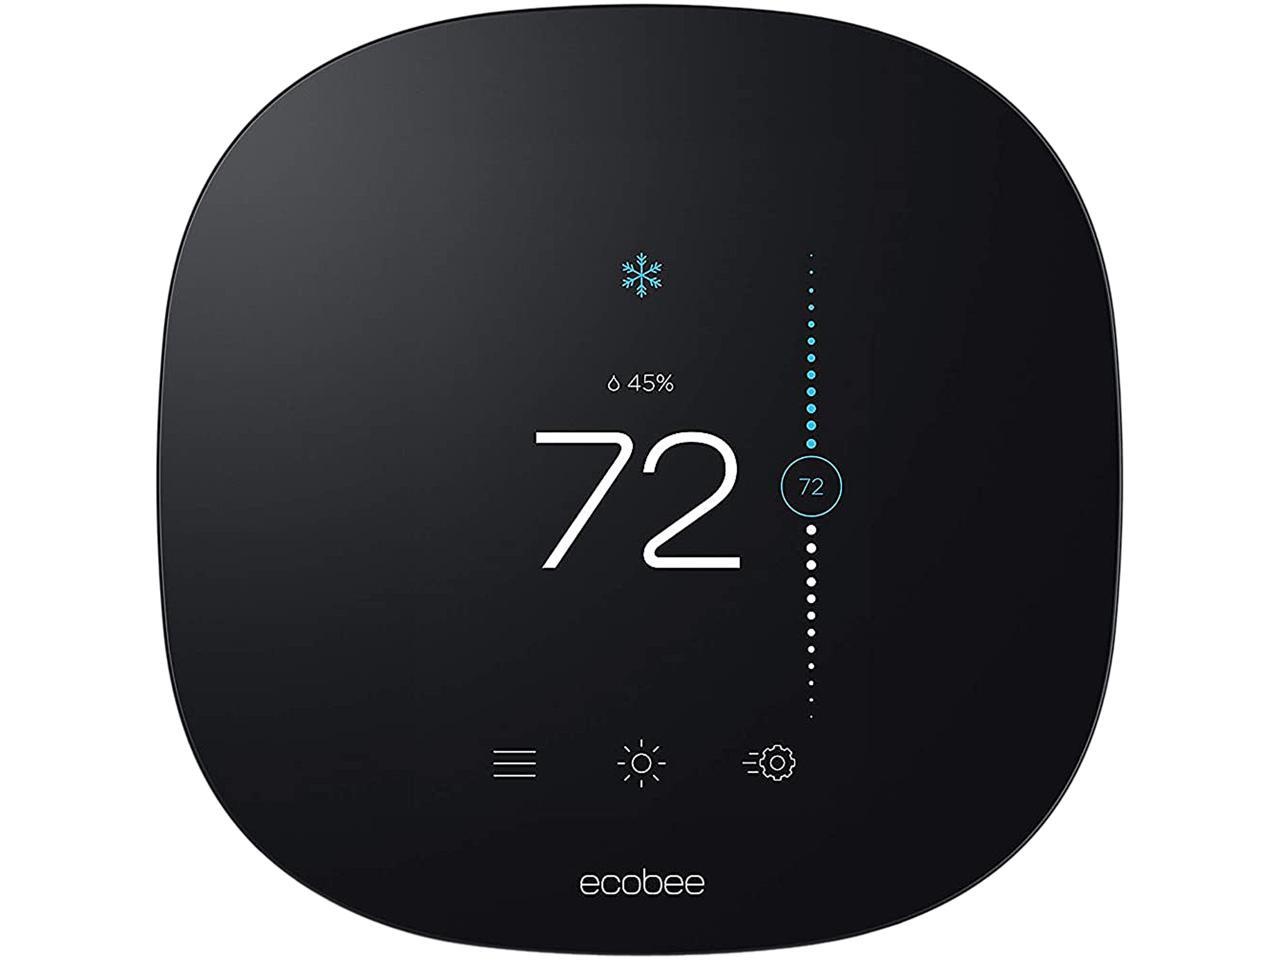 ecobee Lite SmartThermostat, Black, EB-STATE3LT-02 3 lite - 7 Day Programmable Smart Thermostat W/Touchscreen - image 1 of 7